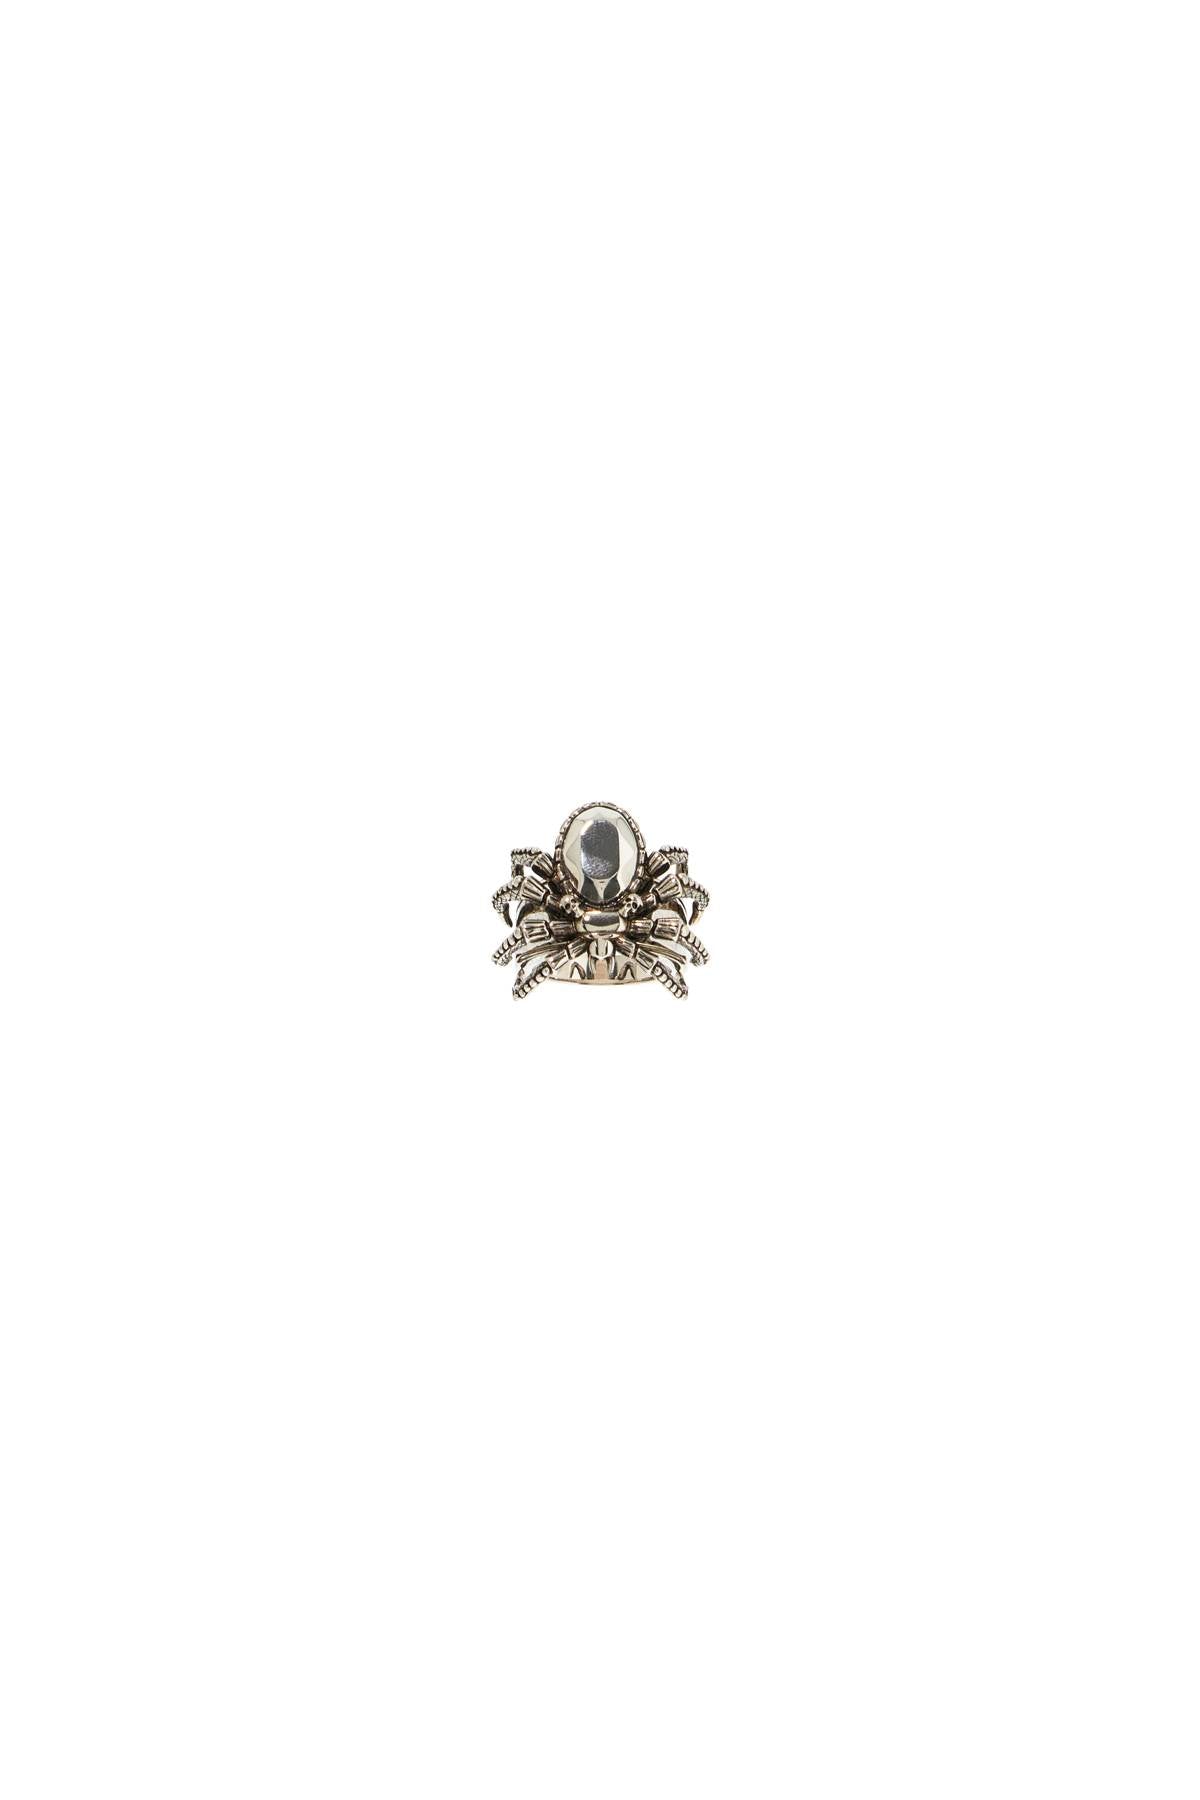 antique silver spider ring in 796053 J160N LIGHT ANT. SILVER